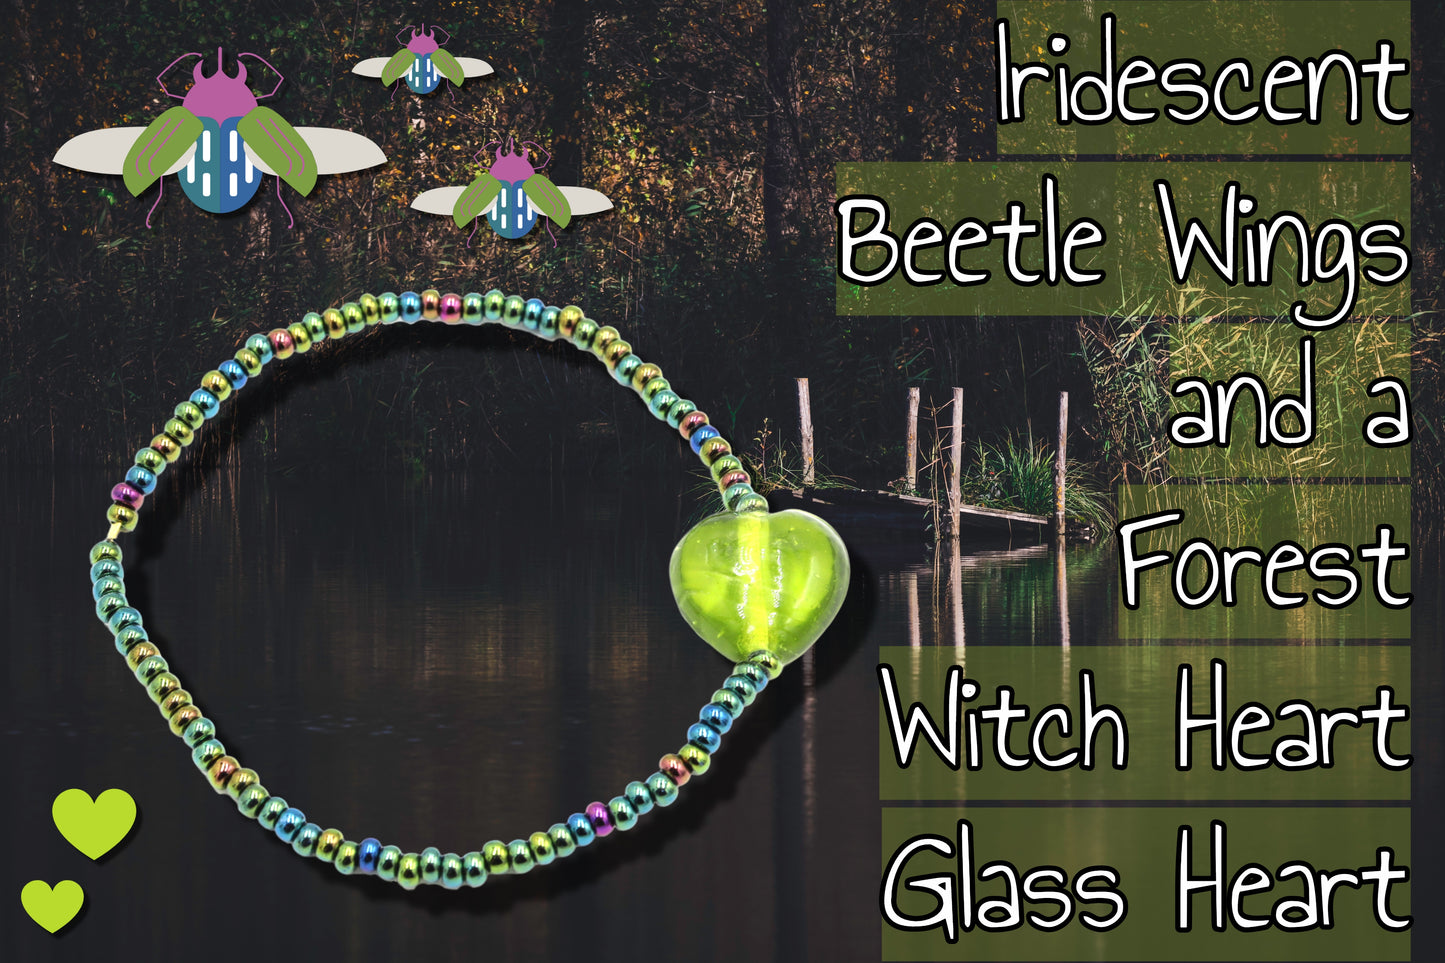 Iridescent Beetle Wings and a Forest Witch Heart Glass Heart Stretch Bracelet by Monkey's Mojo